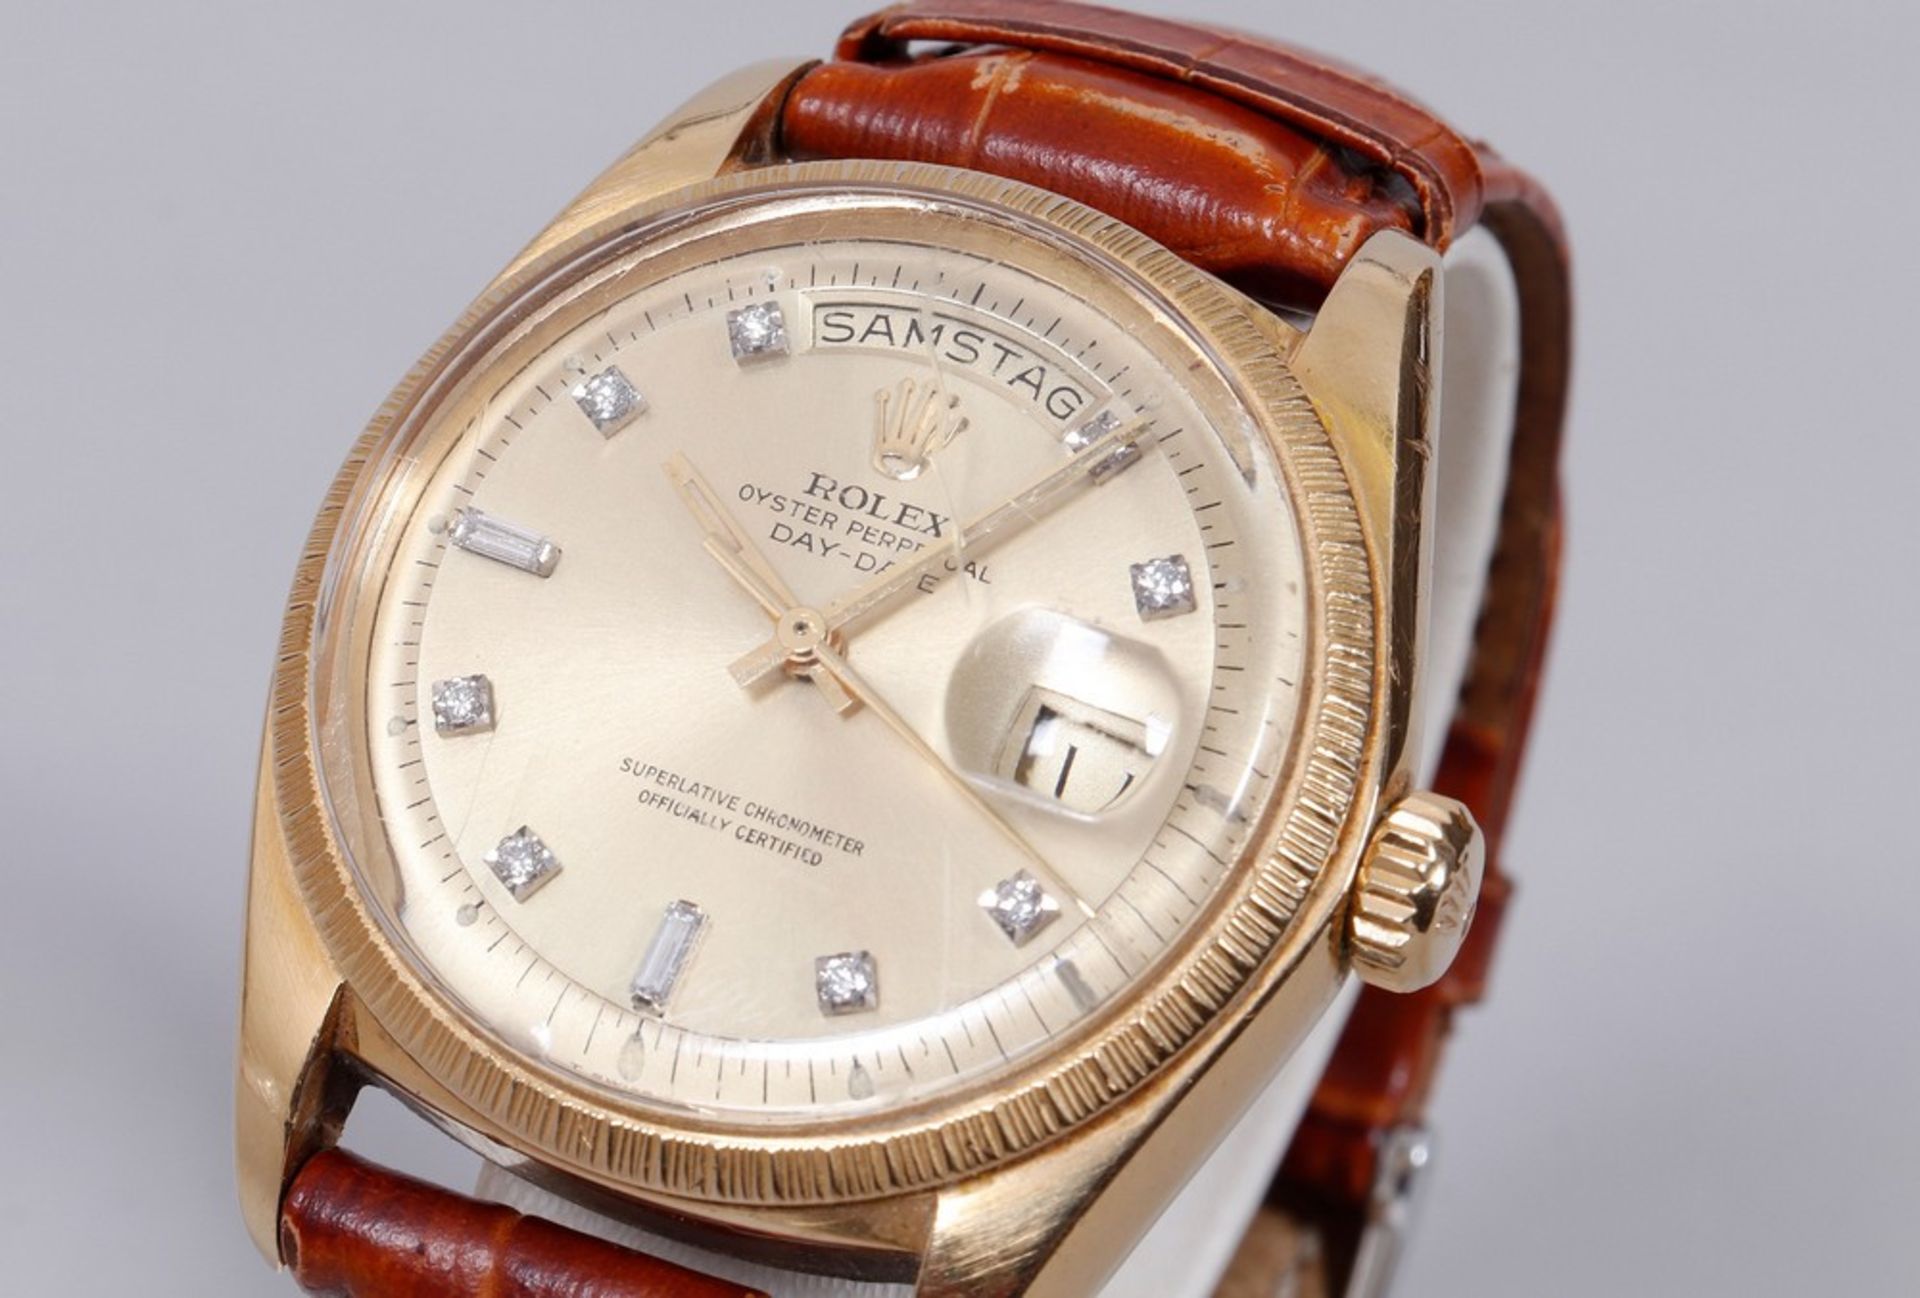 Rolex Day Date, 750 gold, reference 1807, pie pan dial - Image 3 of 5